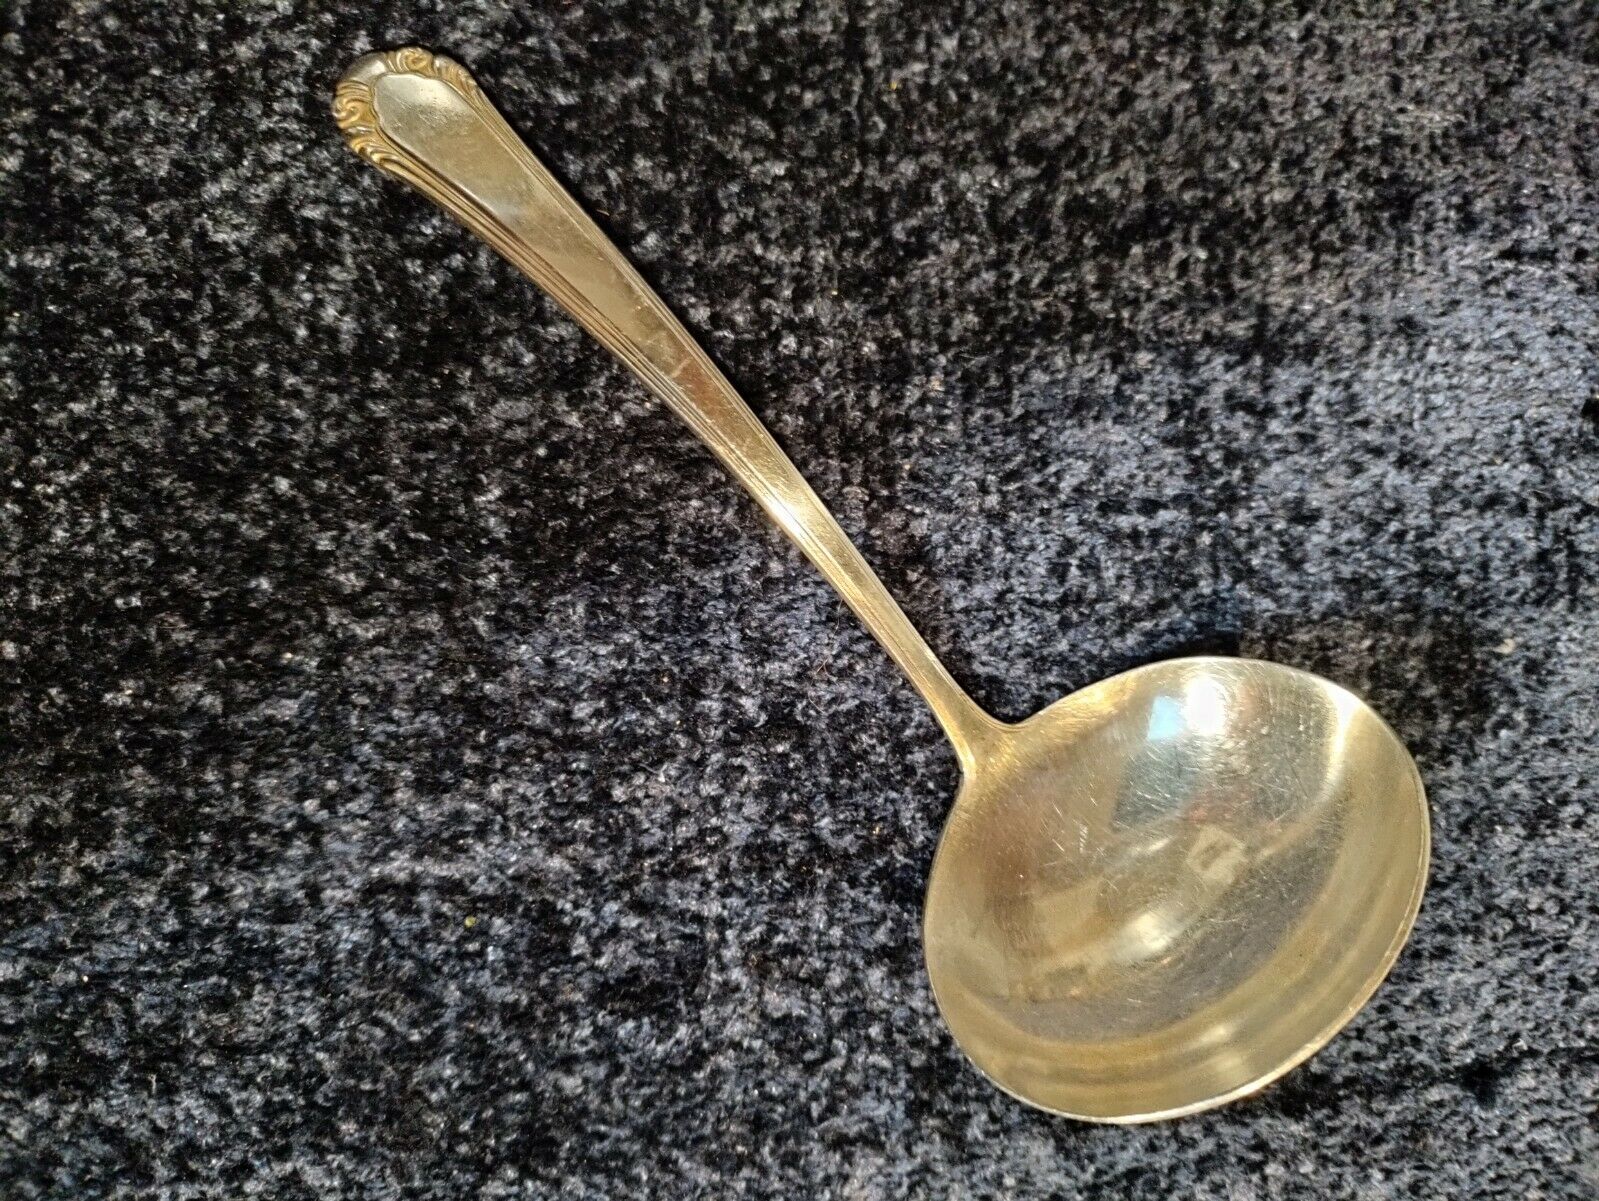 Gorham Silver Plate Cavalier Gravy Ladle - Nice And Ships Free!